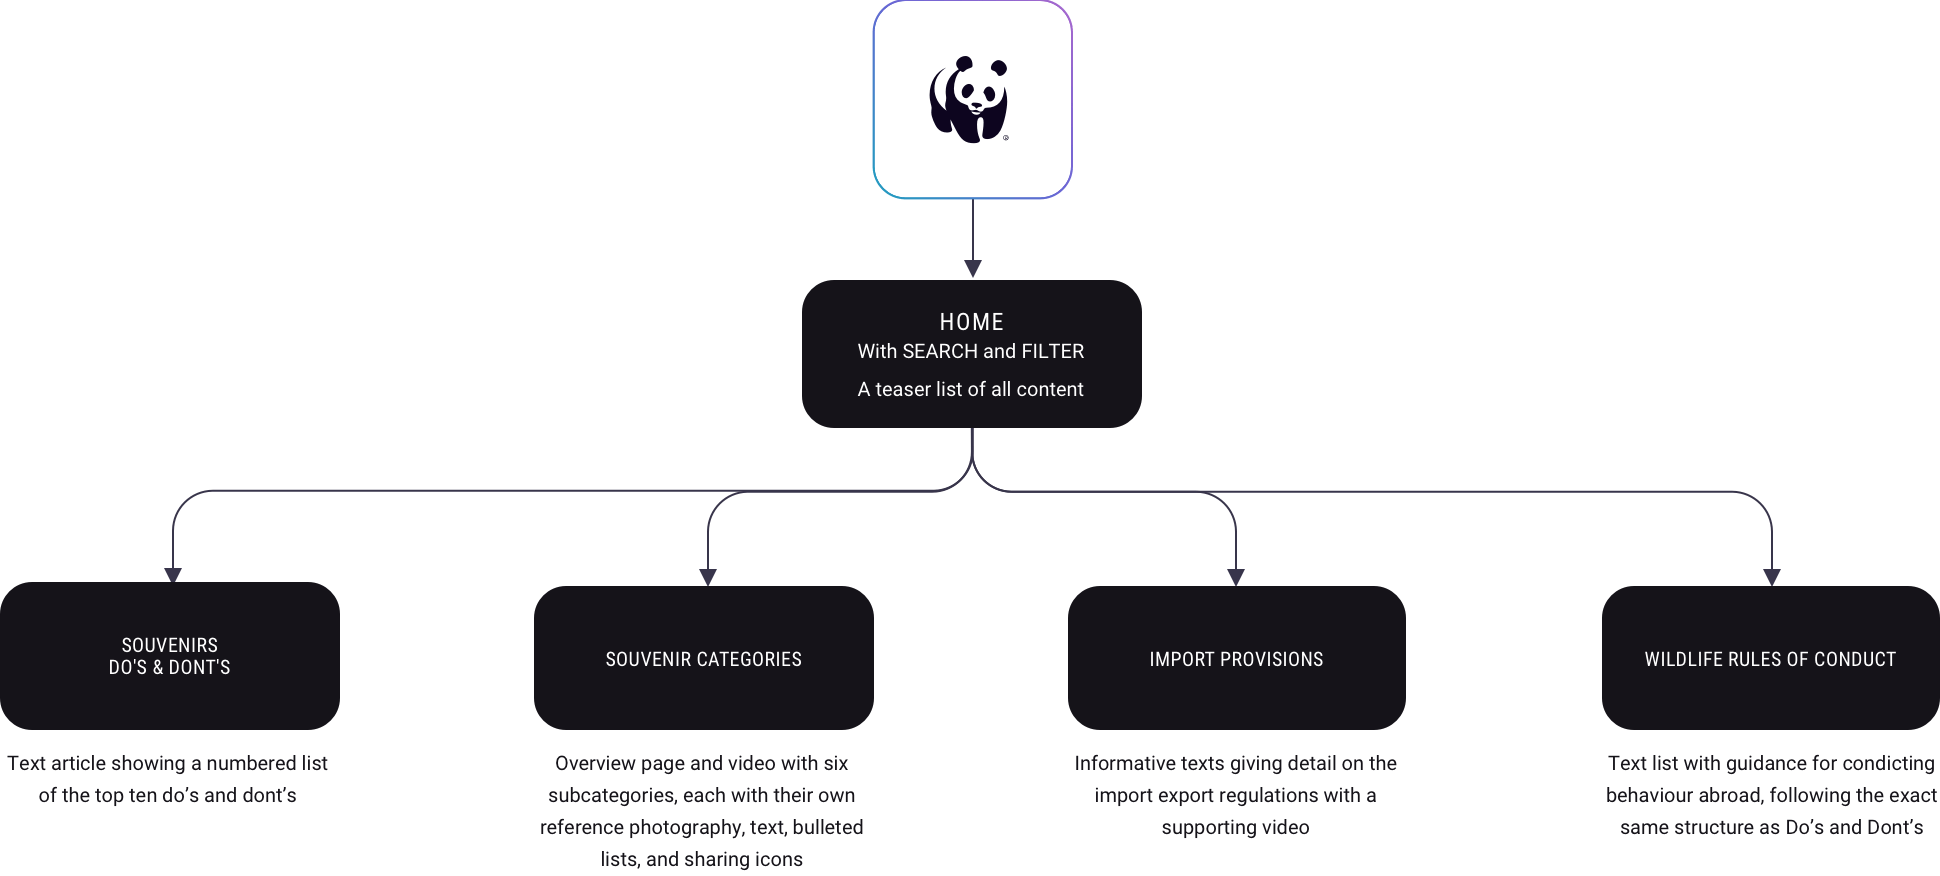 Basic structure of the WWF app